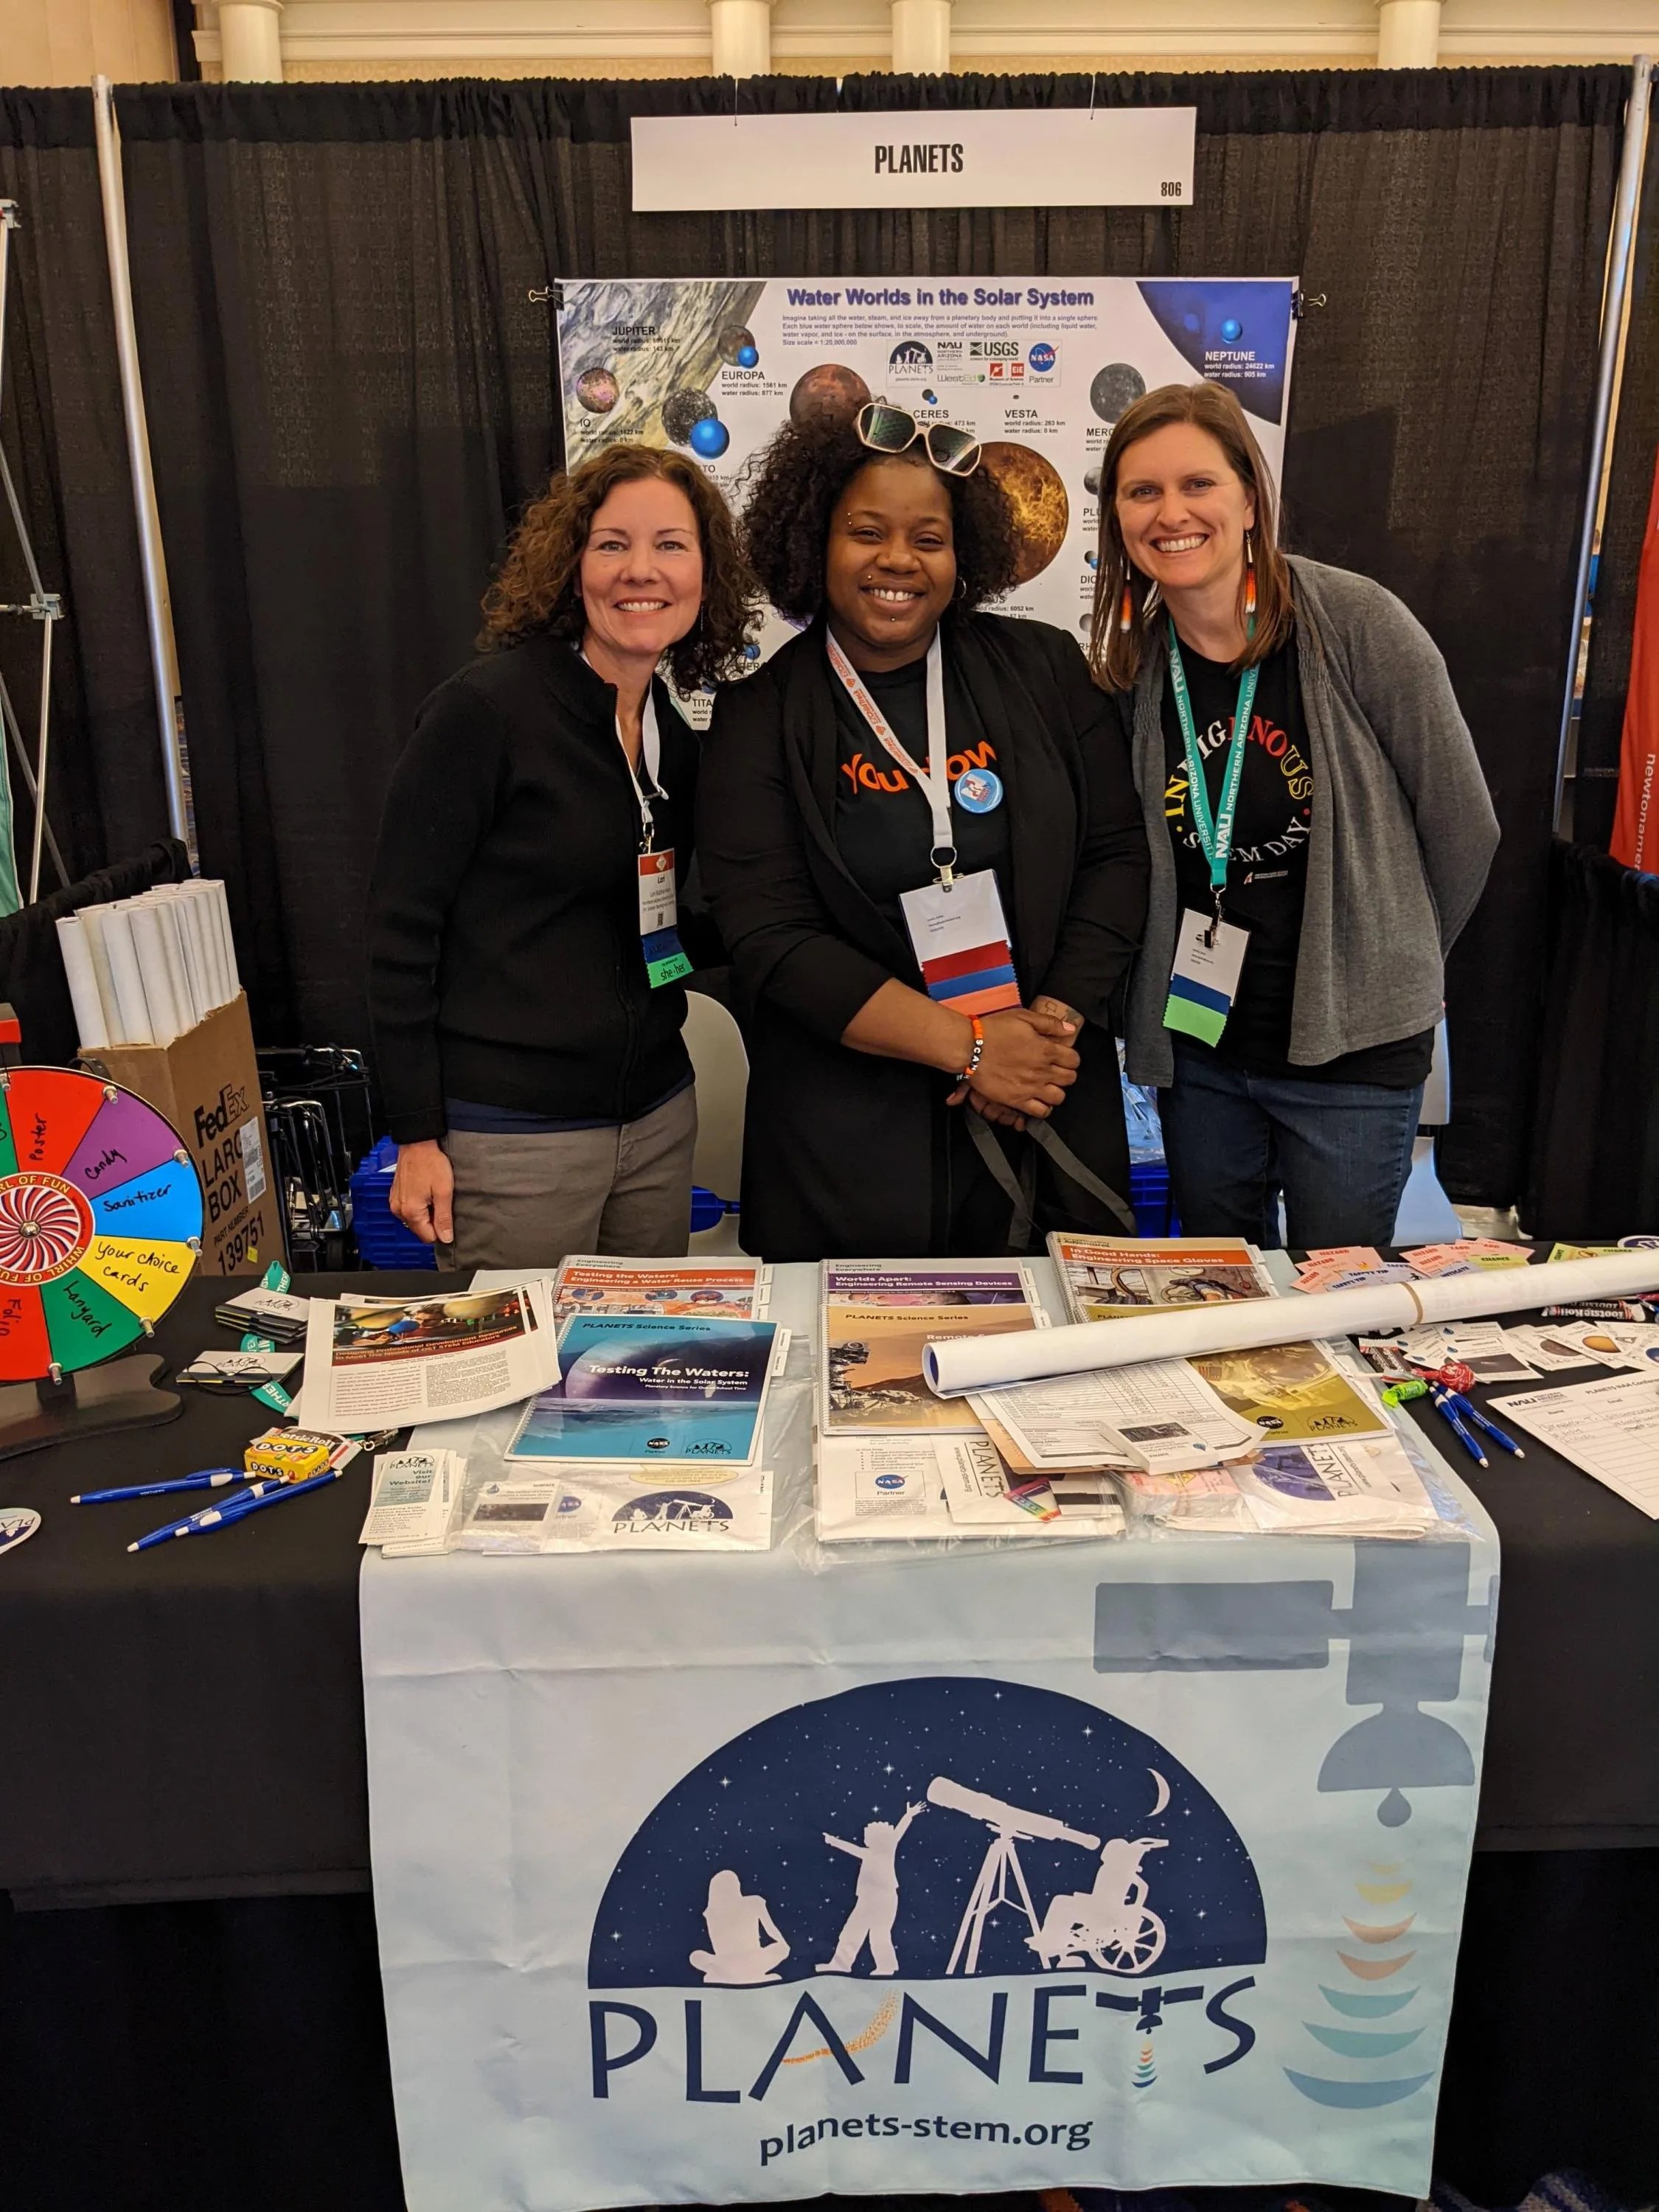 Three people standing behind an exhibit table draped with the PLANETS banner promoting the PLANETS program at the 2022 National Afterschool Association convention in Las Vegas.